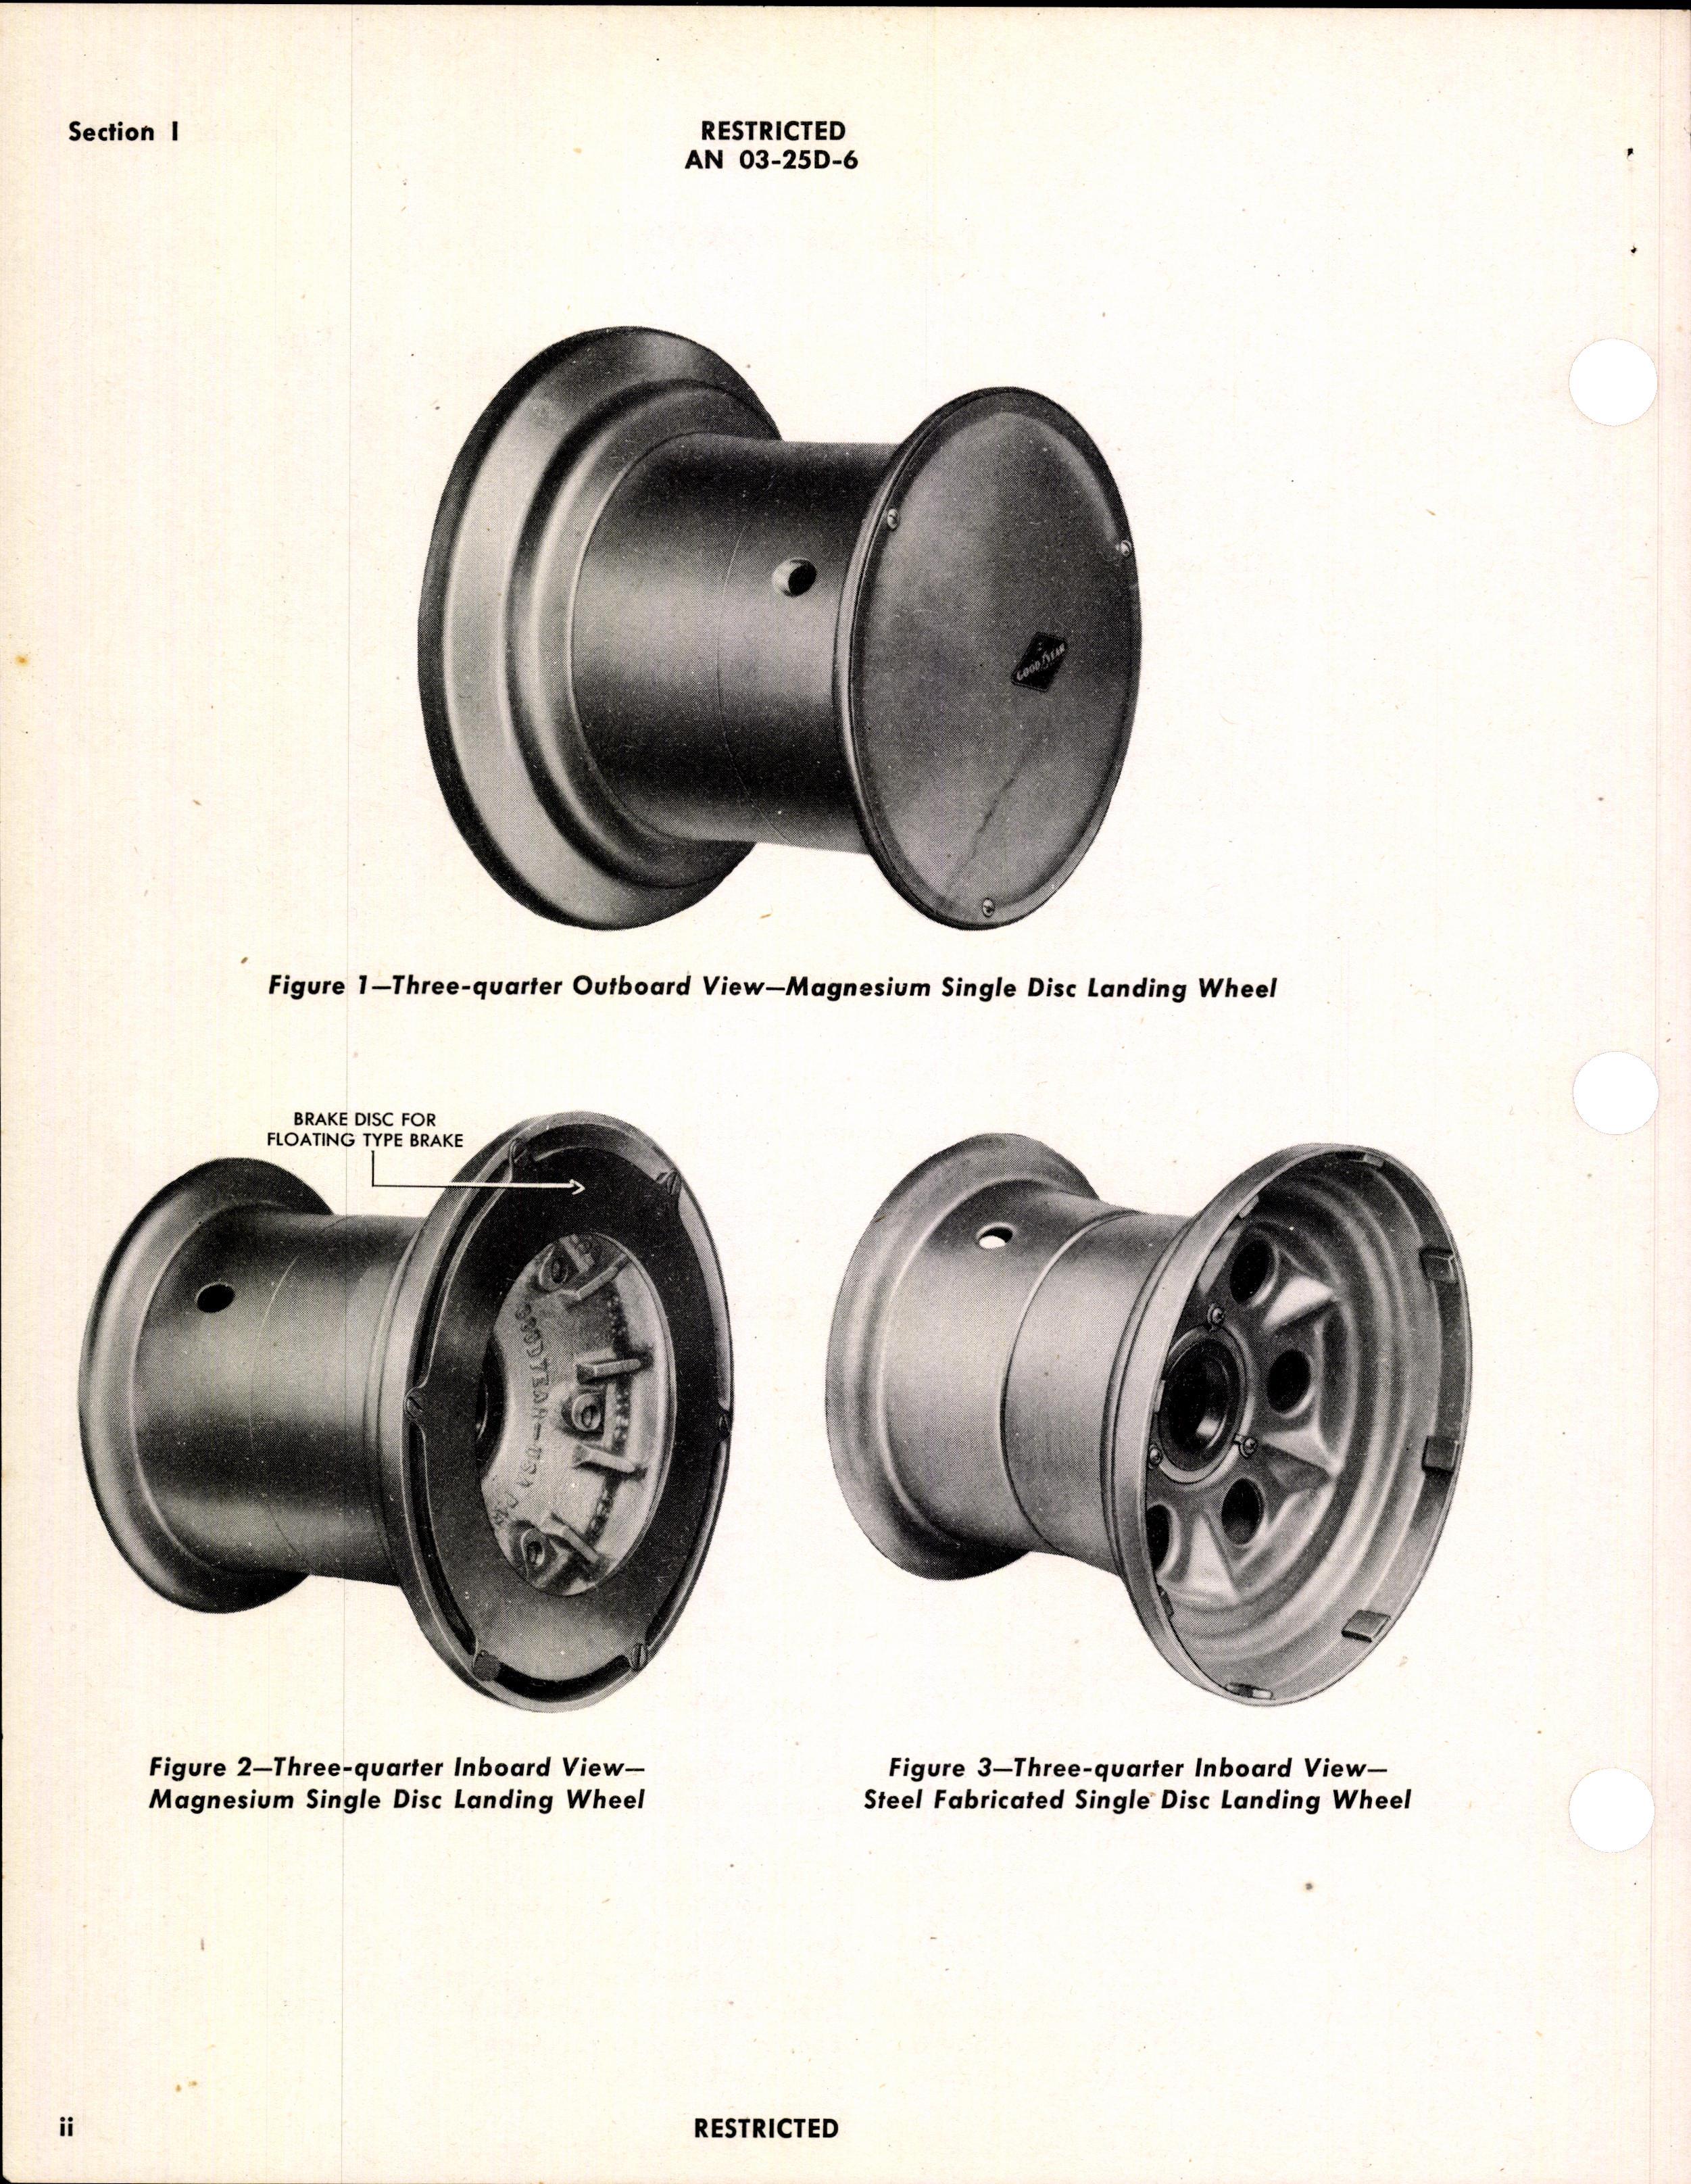 Sample page 4 from AirCorps Library document: Handbook of Instructions with Parts Catalog for Landing Wheels For Use With Single Disc Brakes